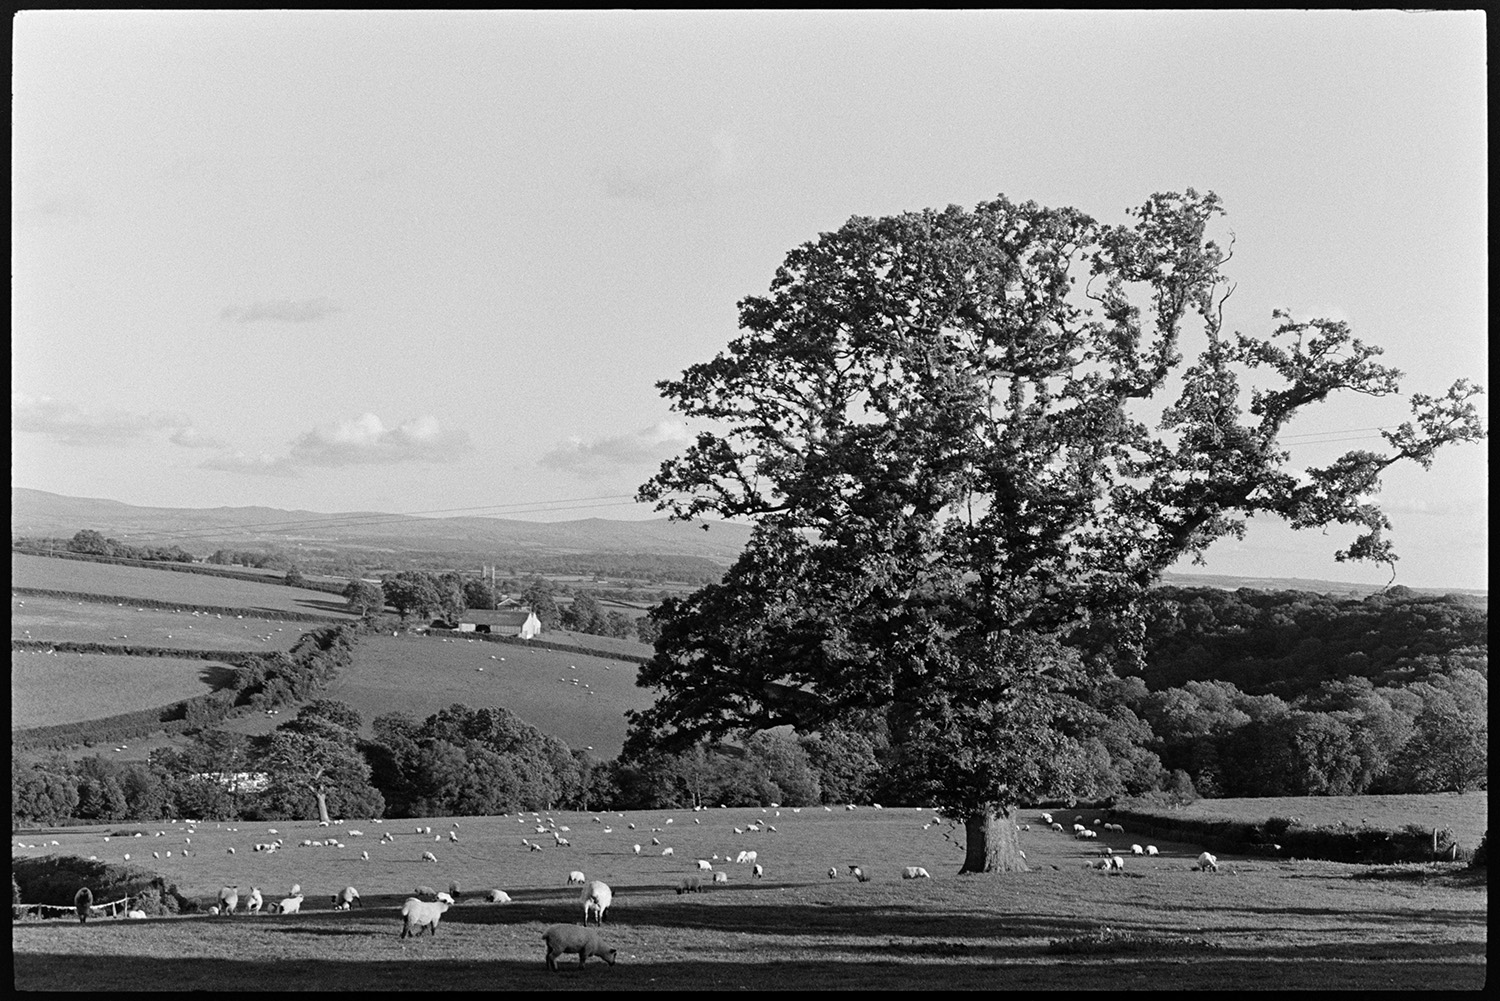 View towards distant moor with sheep grazing. 
[Sheep grazing in a field with a large oak tree at Iddesleigh. A landscape of fields, hedgerows and farm buildings can be seen in the background and Dartmoor is visible in the distance.]